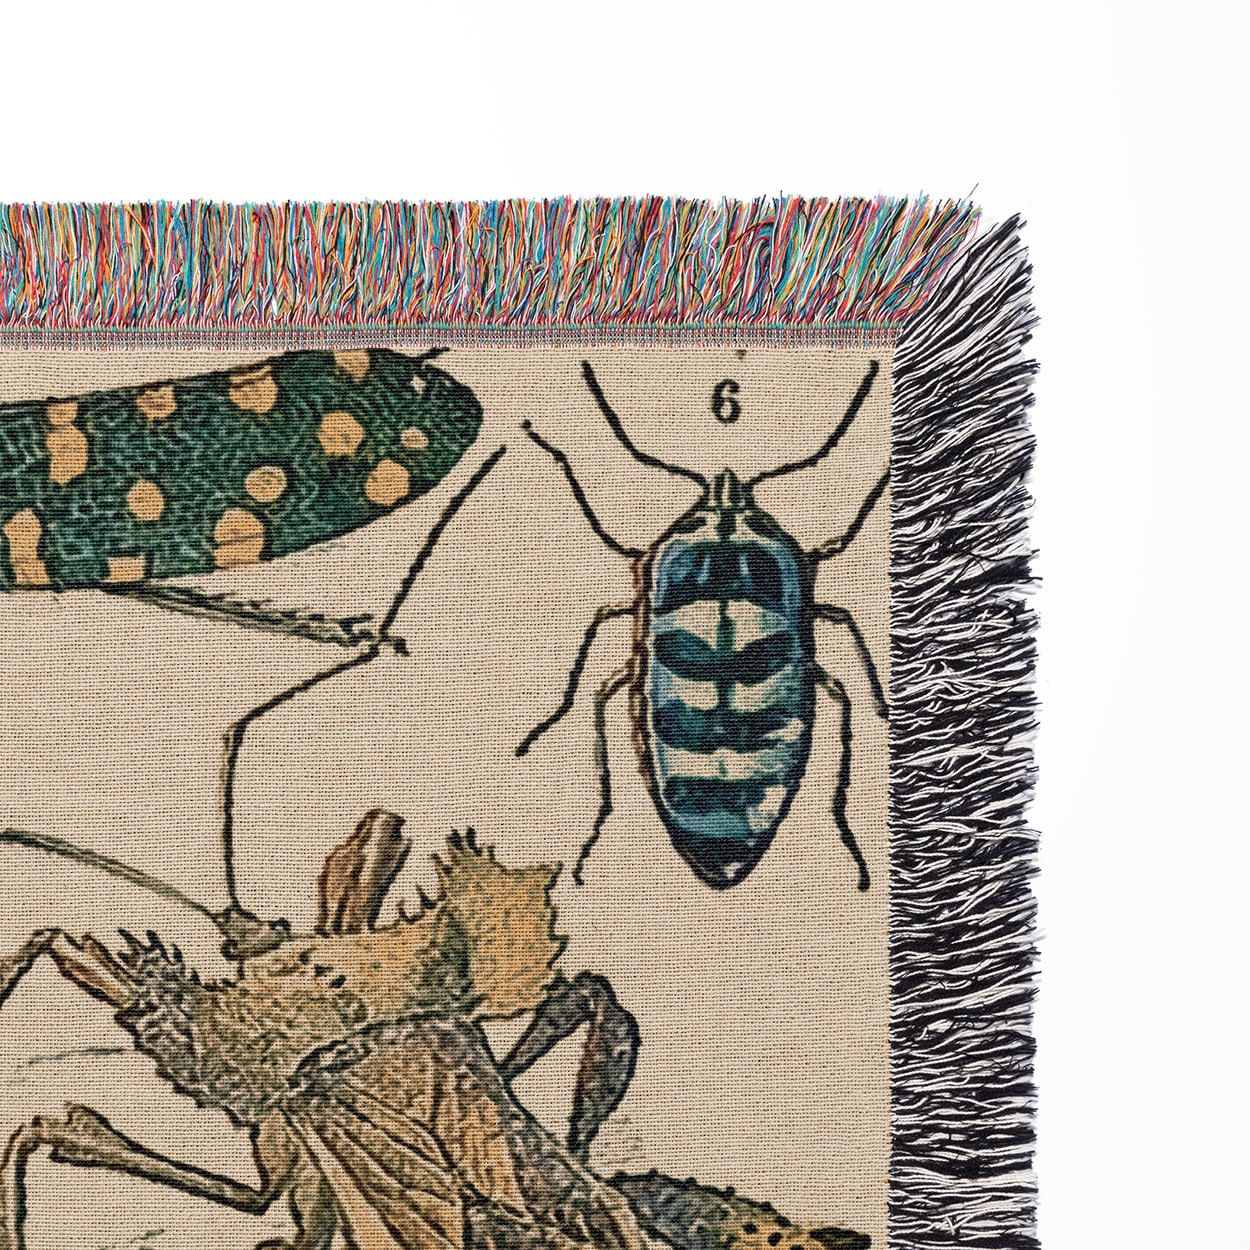 Bugs and Insects Woven Blanket Woven Blanket Close Up